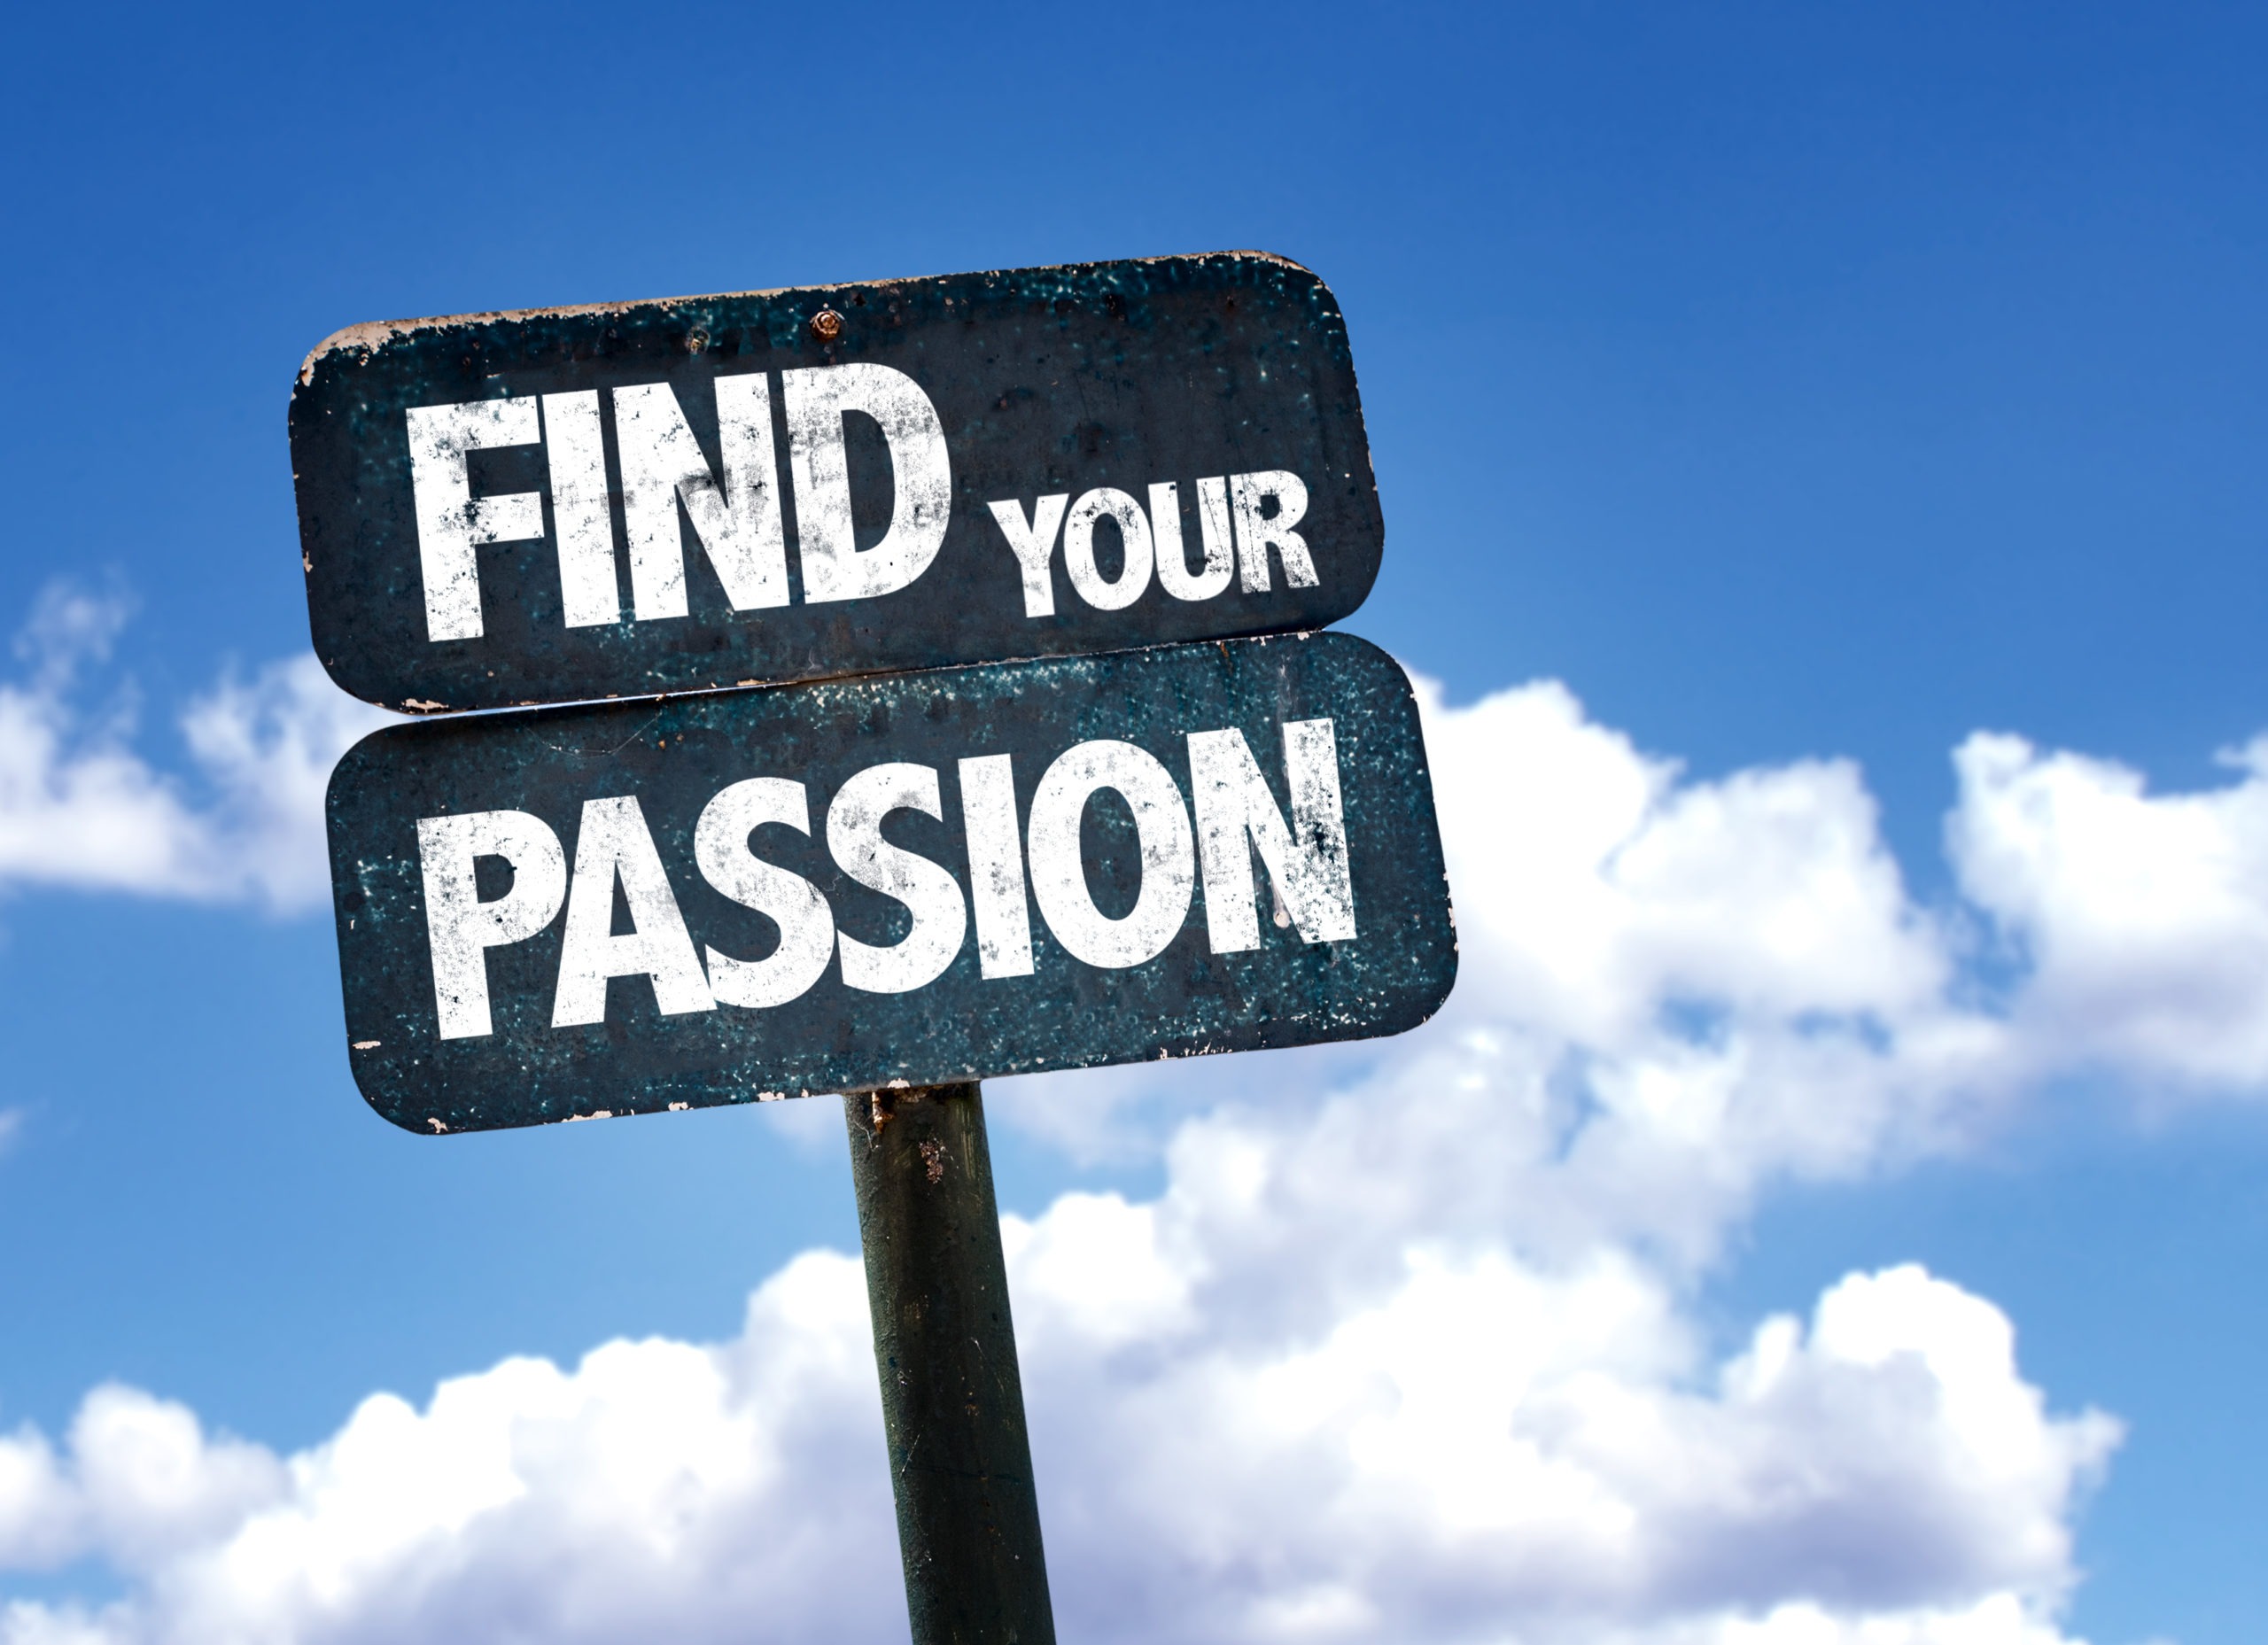 Road sign with words "Find Your Passion"